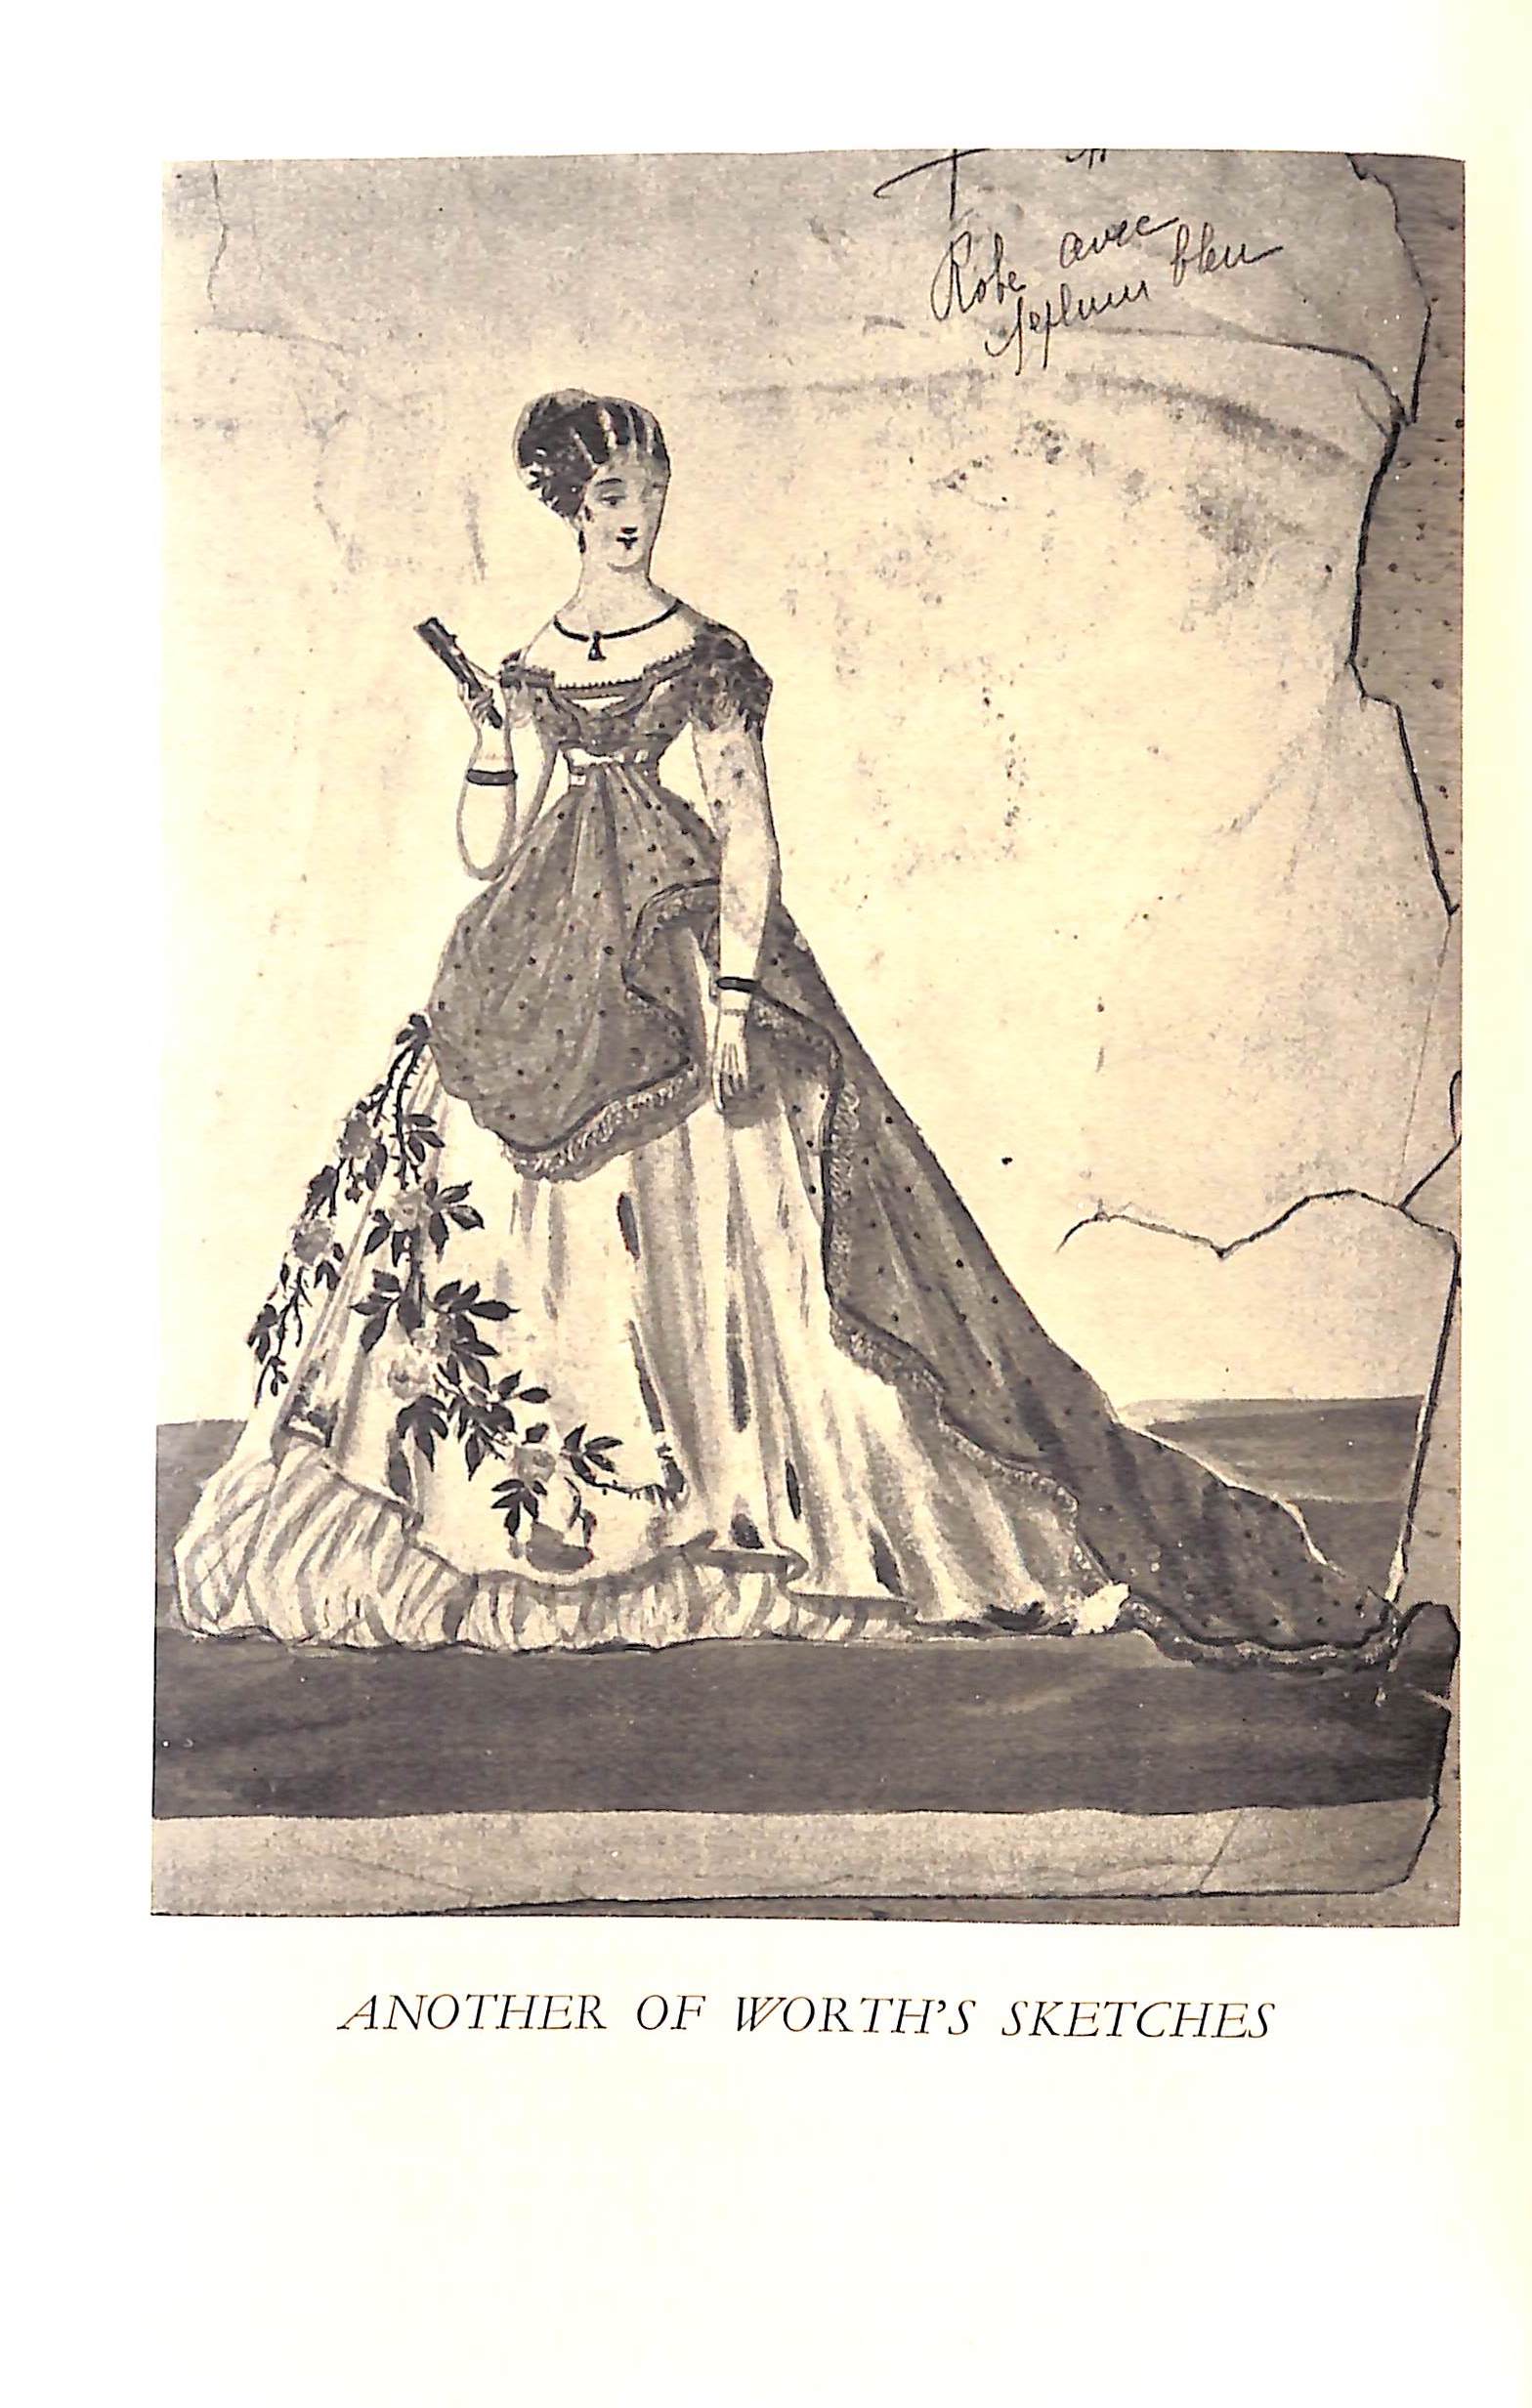 The Age Of Worth - Couturier to the Empress Eugenie: Saunders